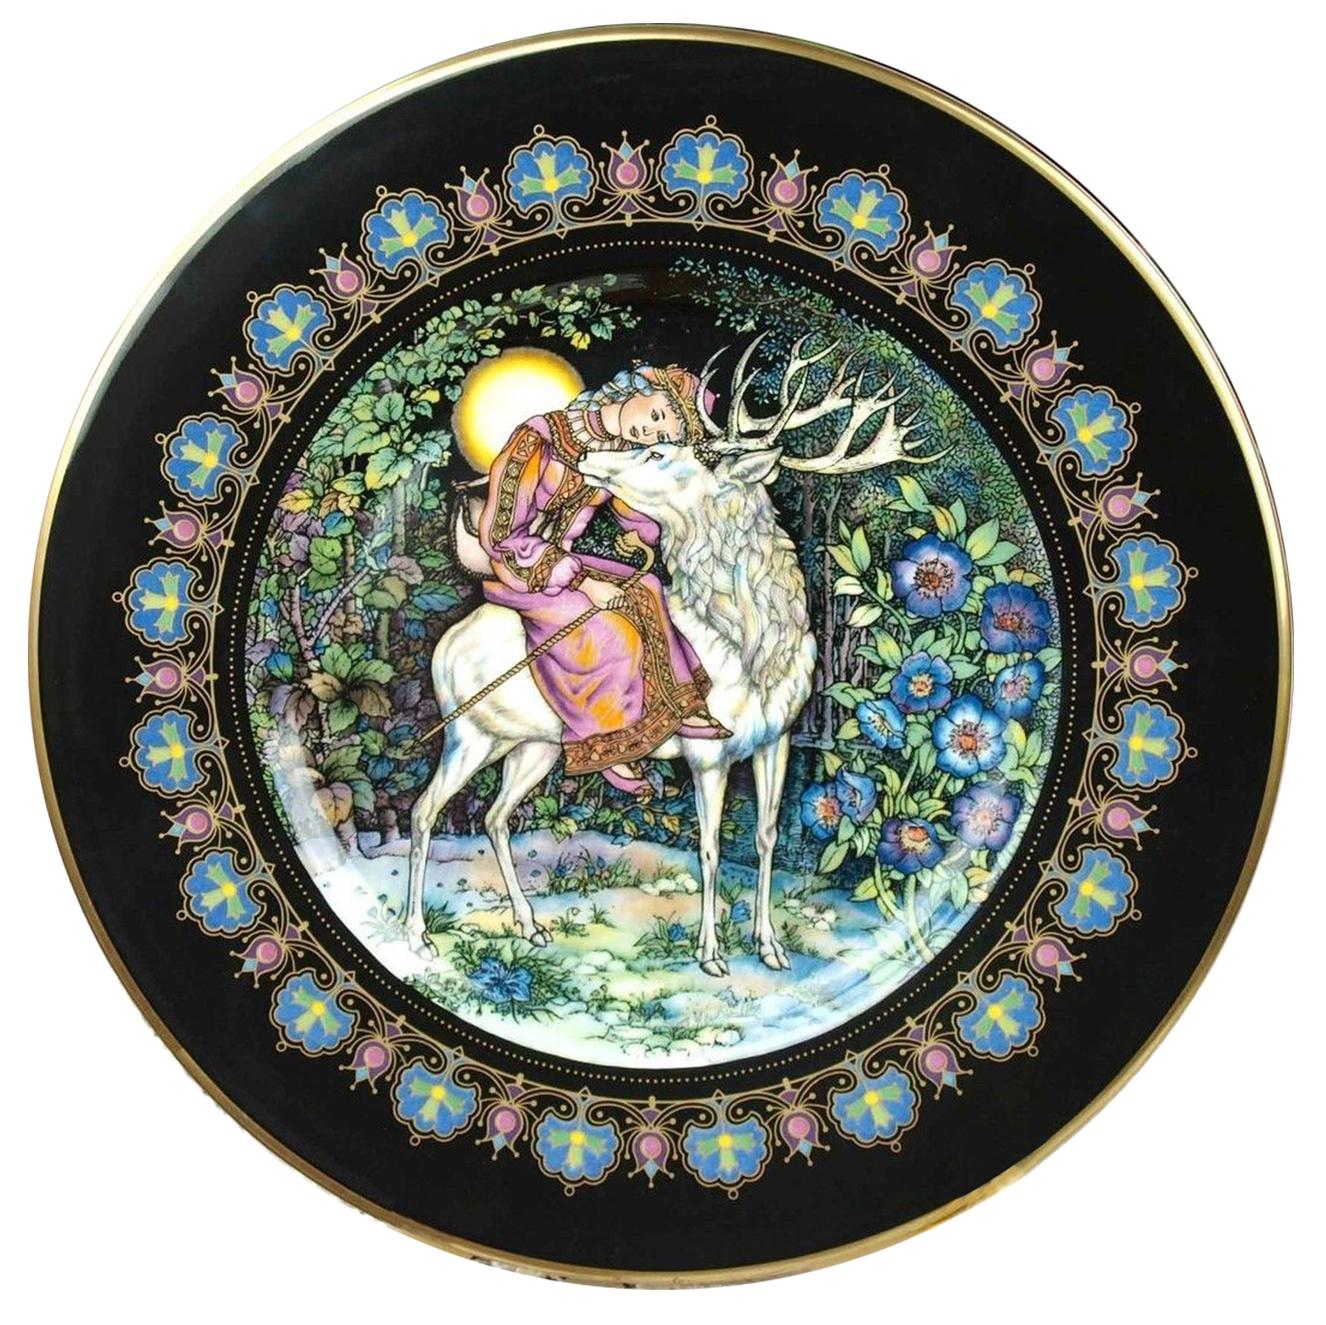 Three Magical Fairy Tales Old Russia Plates by Gere Fauth In Excellent Condition For Sale In Rijssen, NL